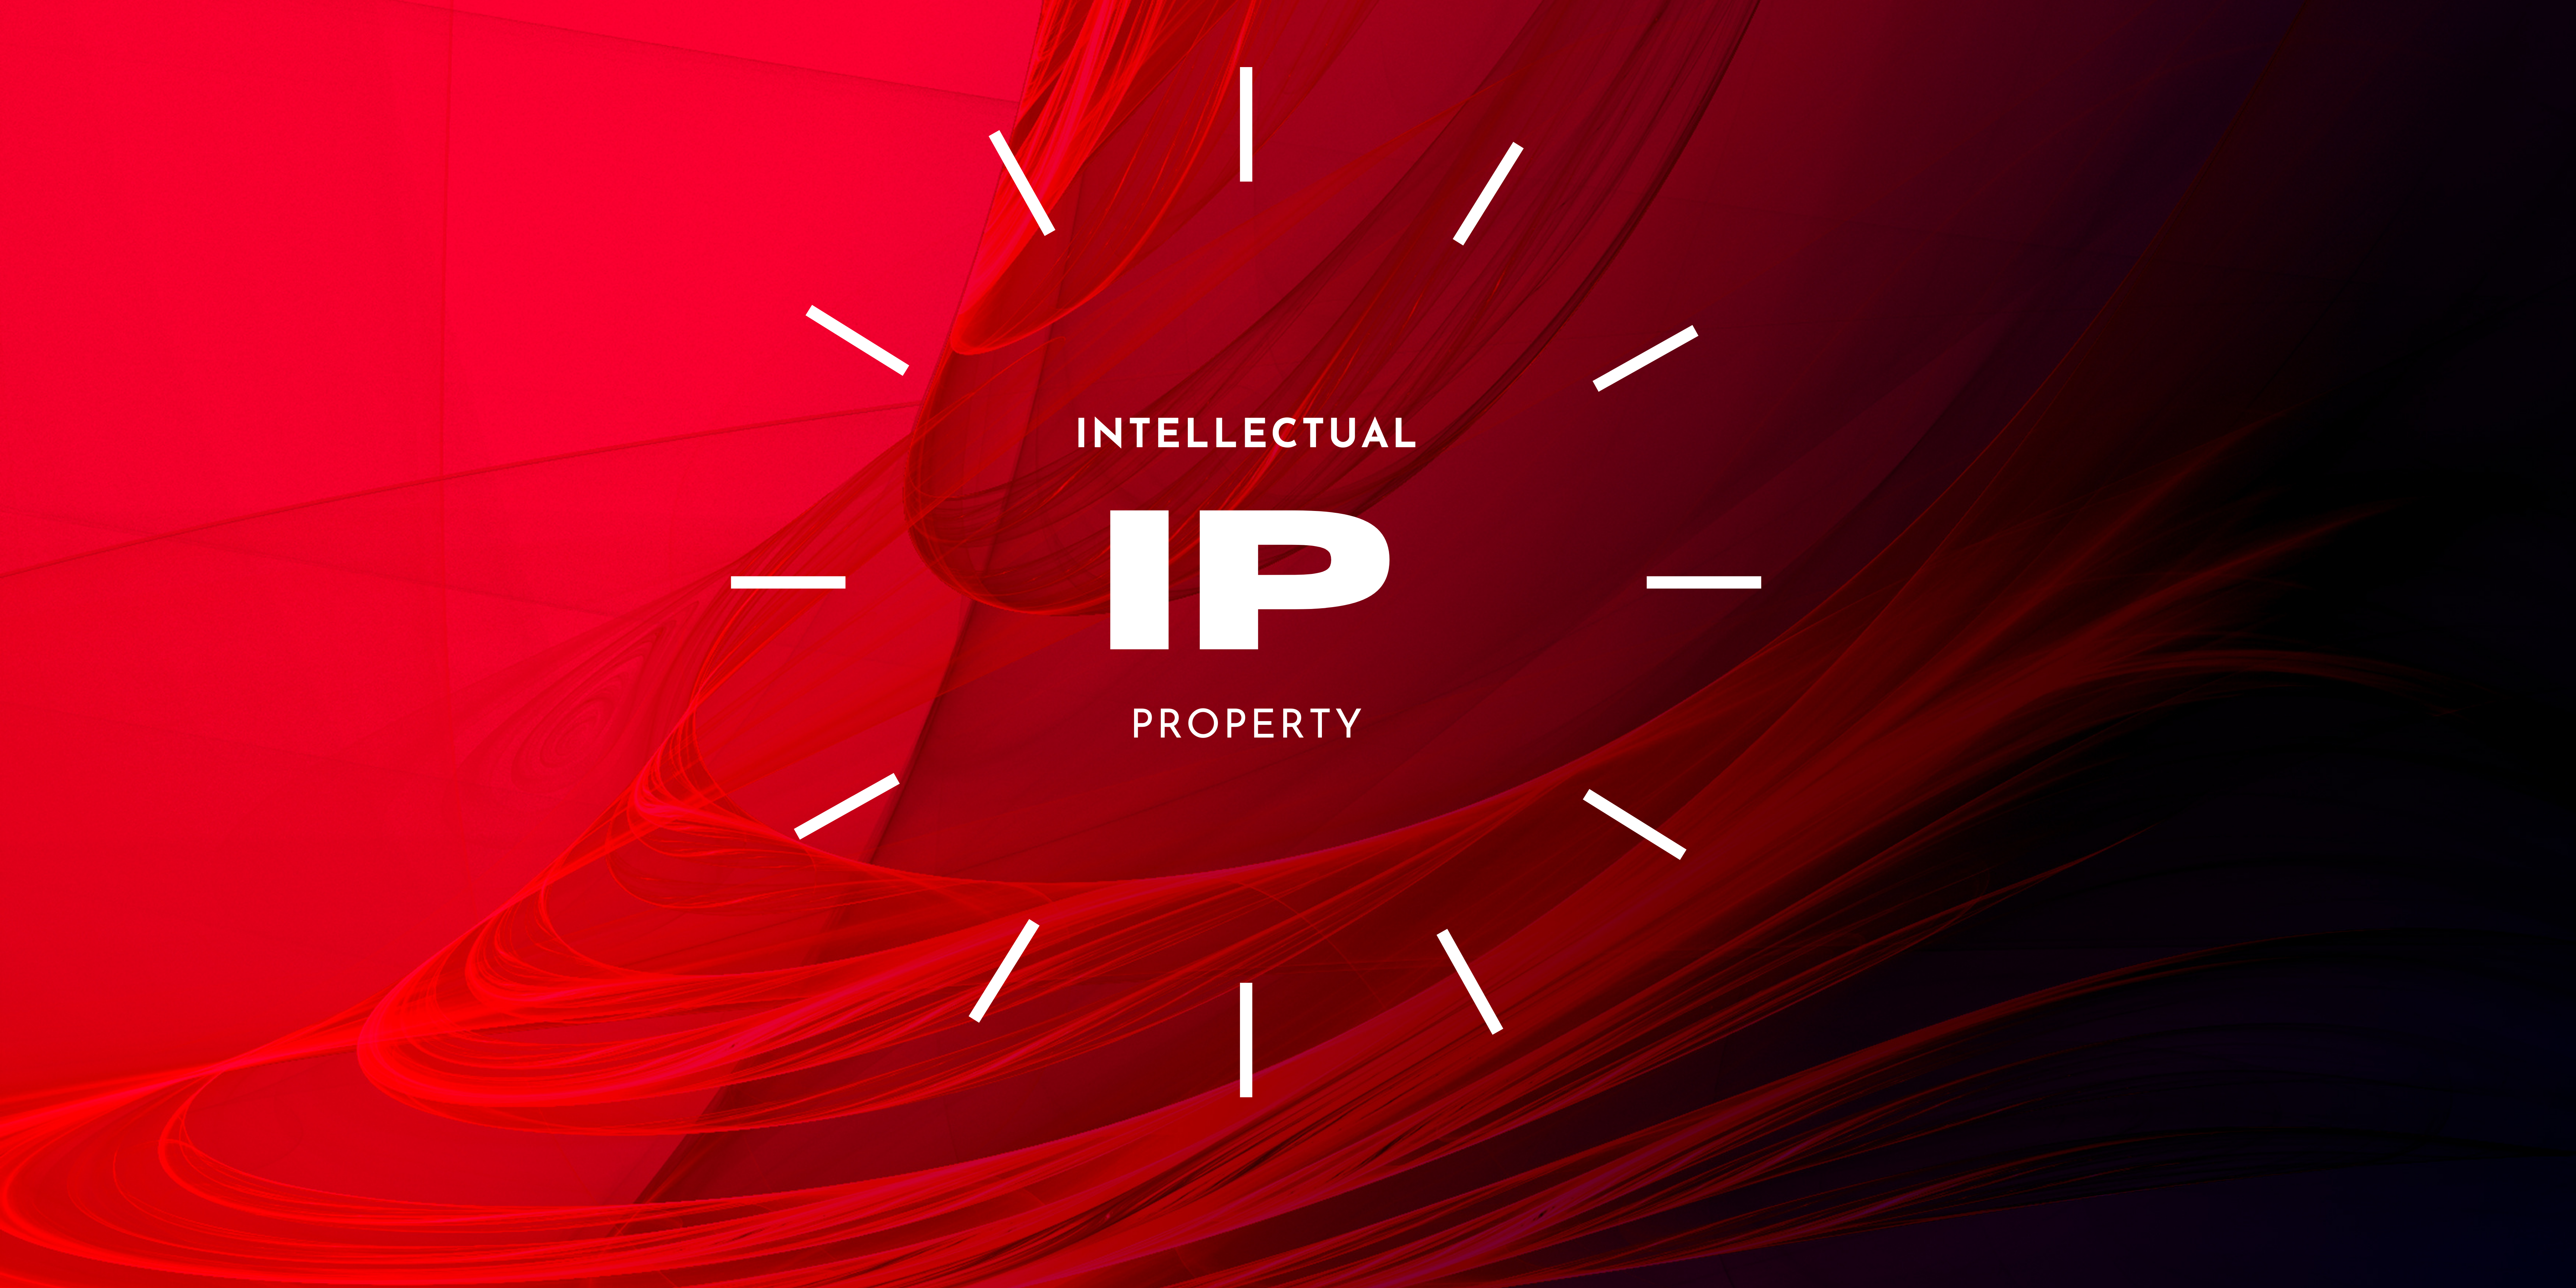 Overview of IP Rights: What Your Business Needs to Know